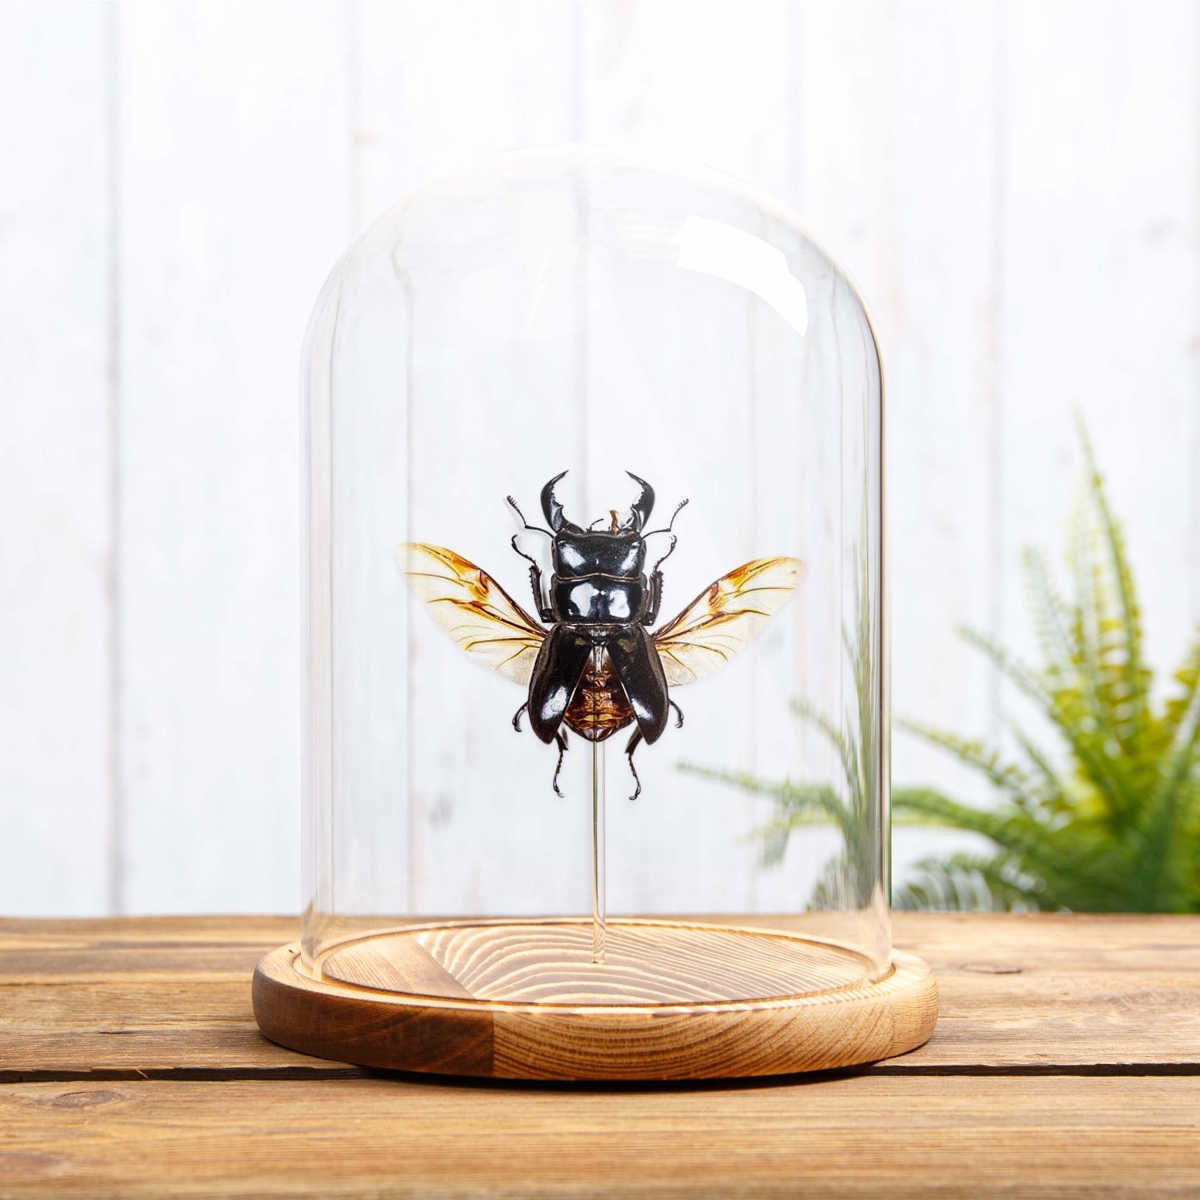 Wing-spread Giant Stag Beetle in Glass Dome with Wooden Base (Dorcus titanus)